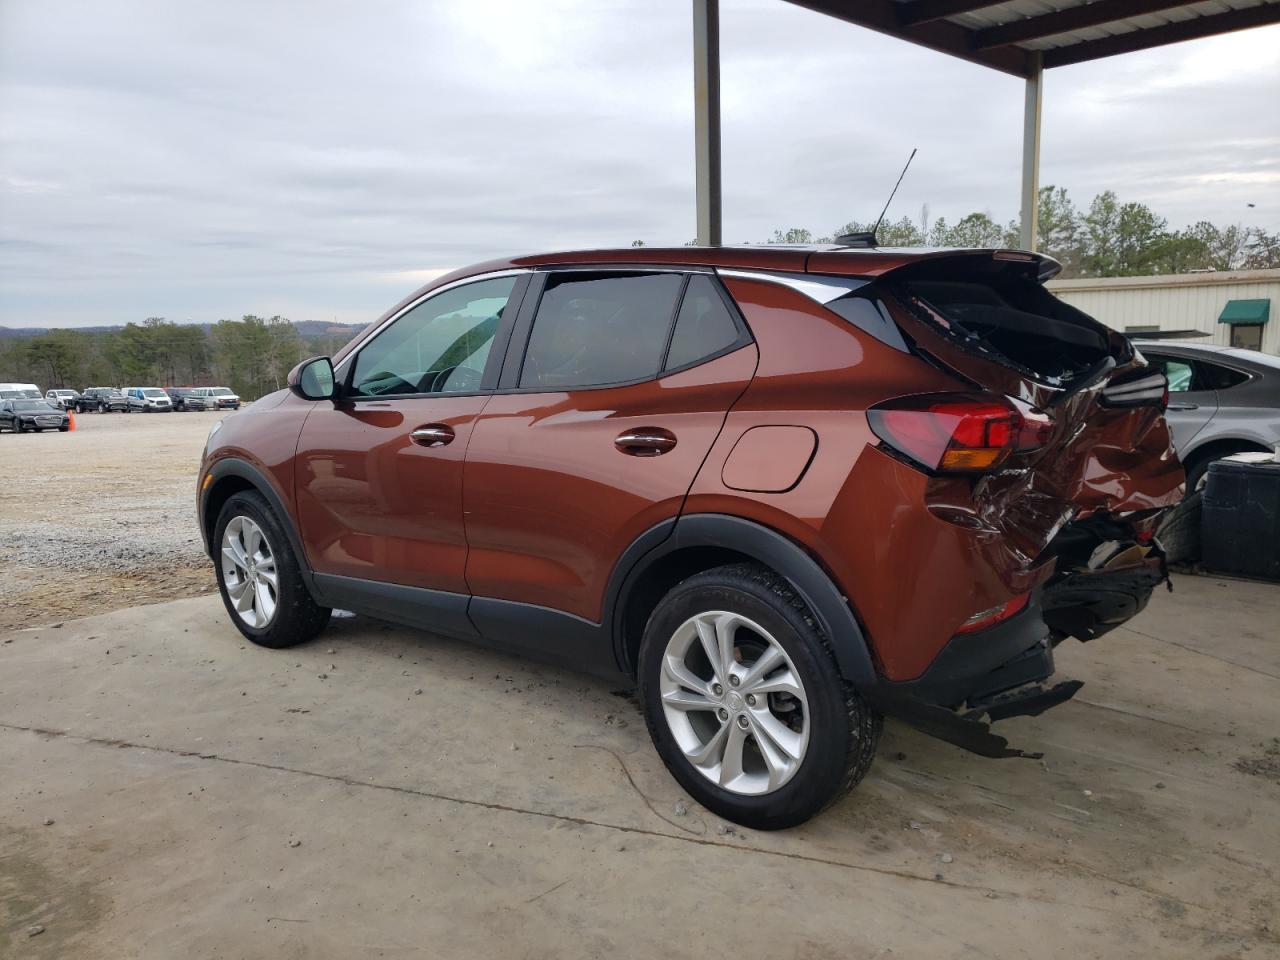 KL4MMBS29LB****** Used and Repairable 2020 Buick Encore in AL - Hueytown